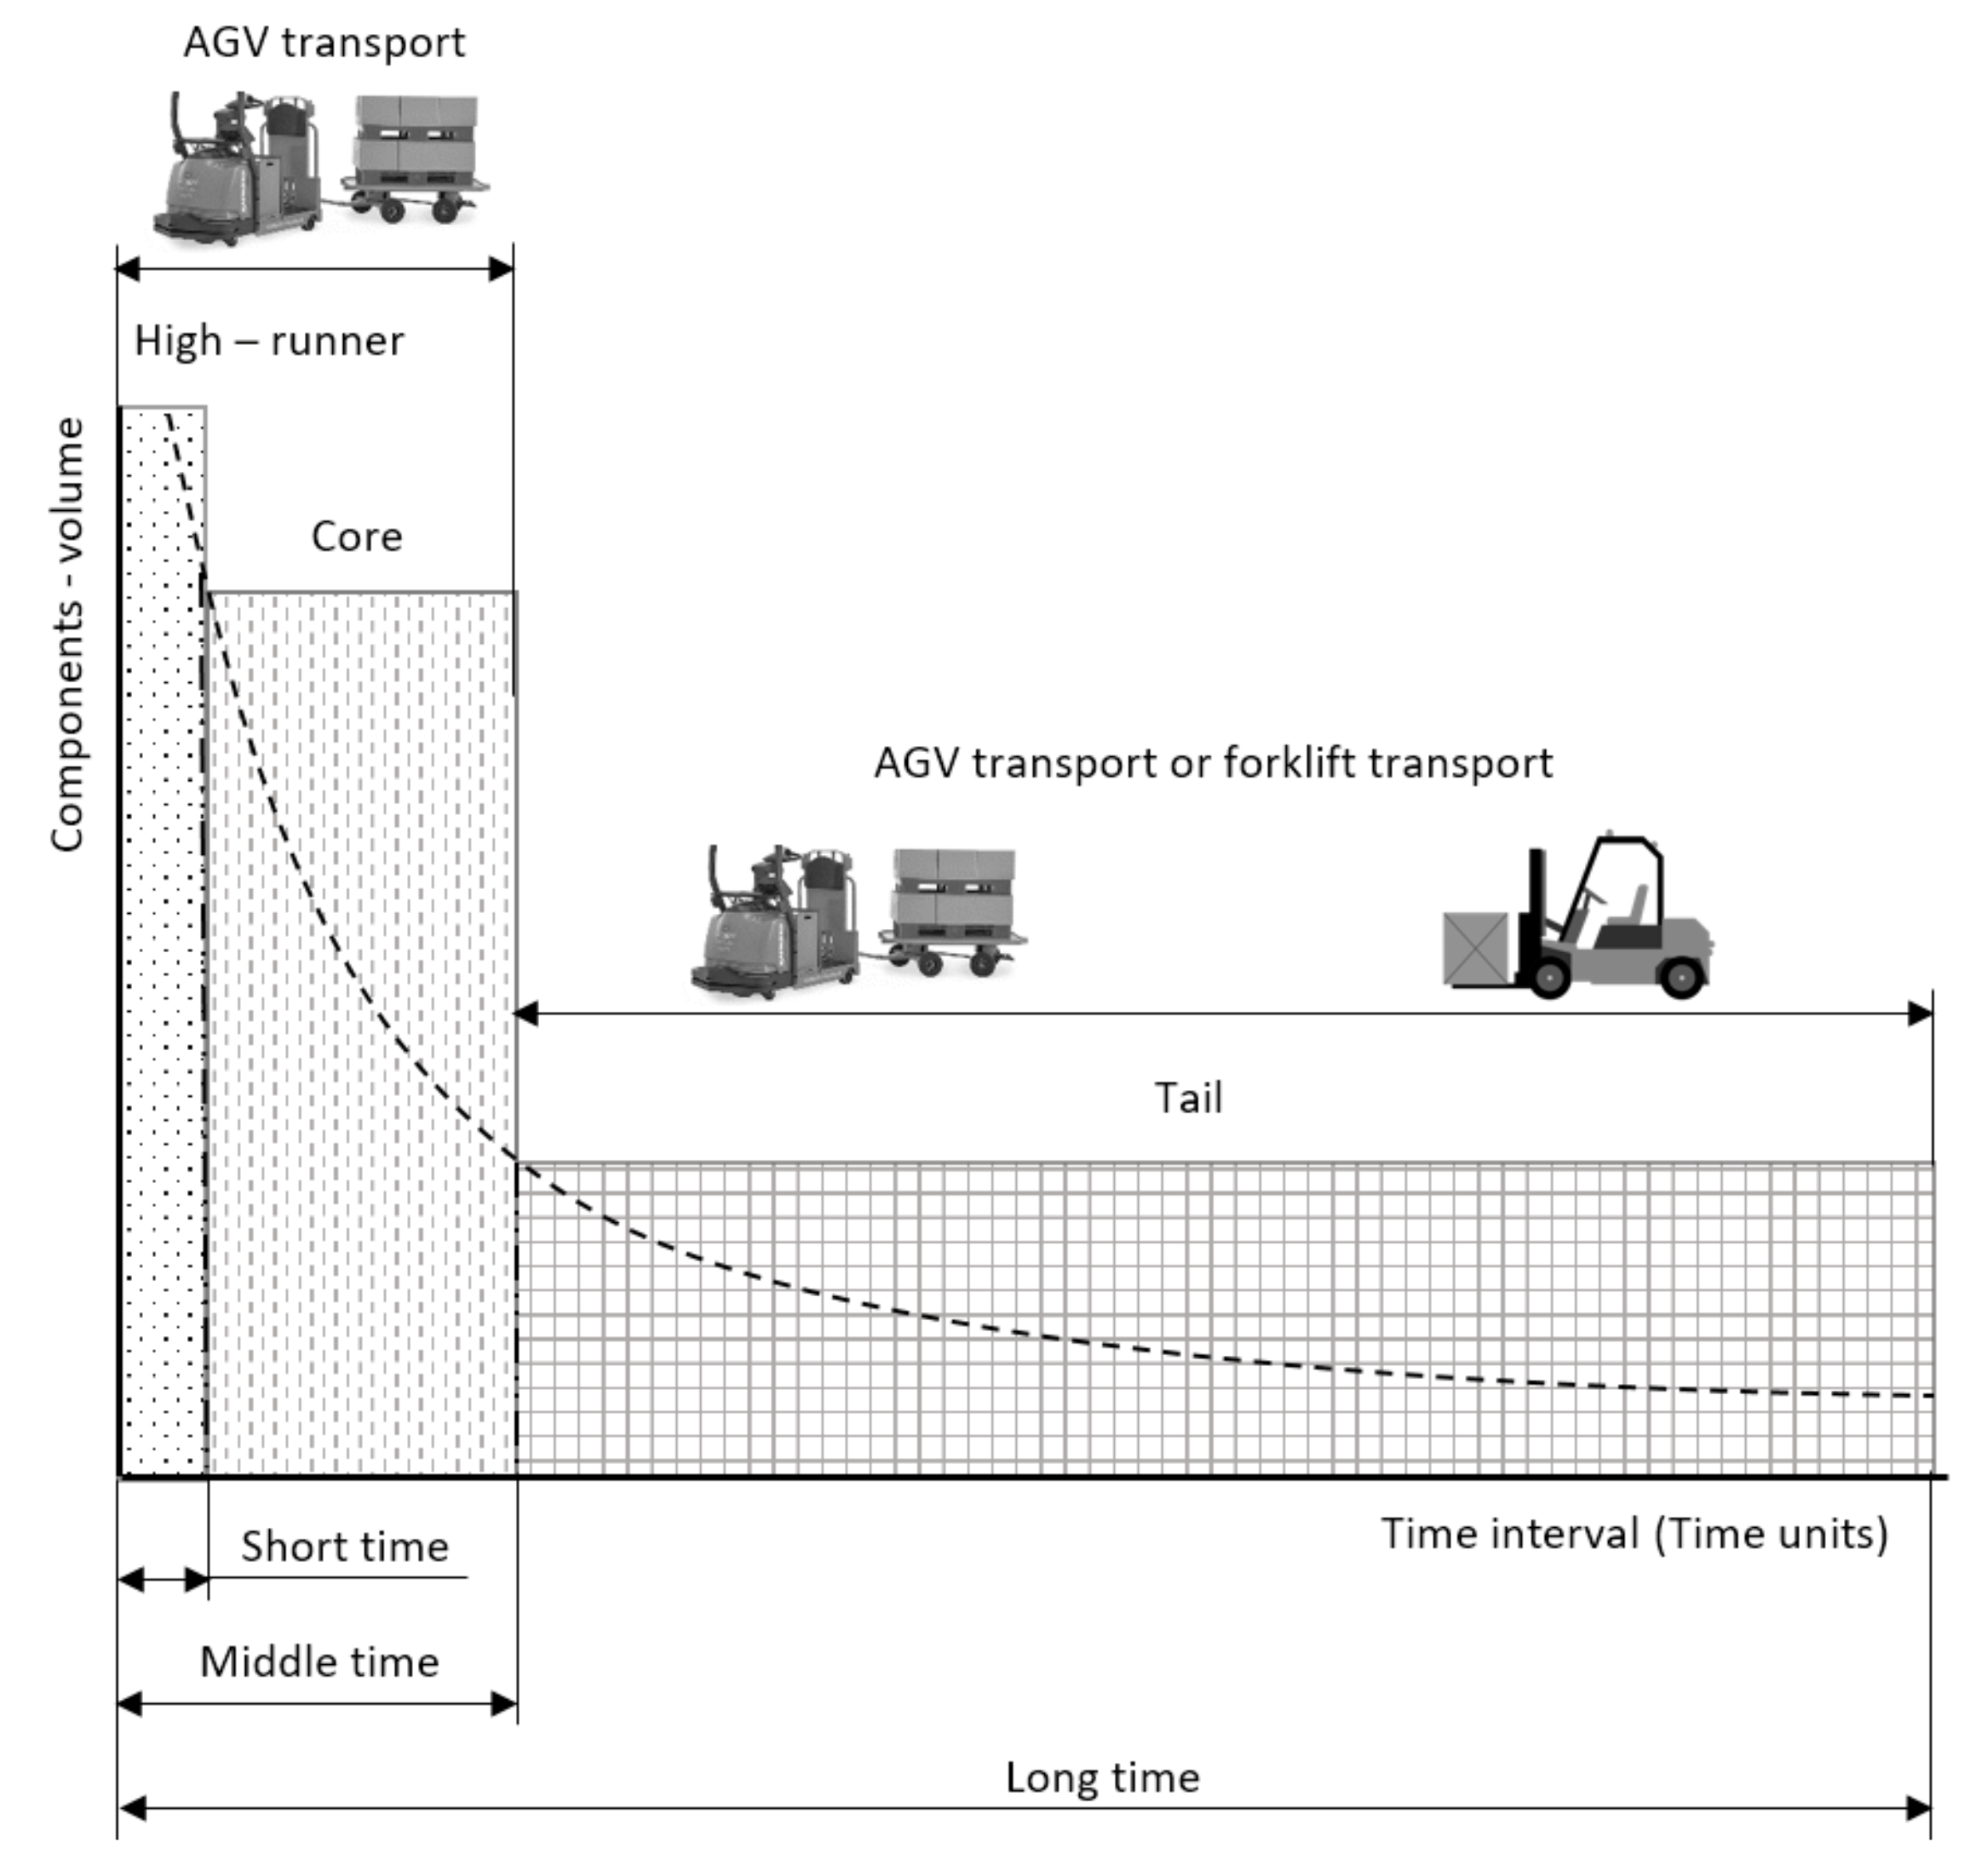 Sustainability | Free Full-Text | The Use of a Simulation Model for  High-Runner Strategy Implementation in Warehouse Logistics